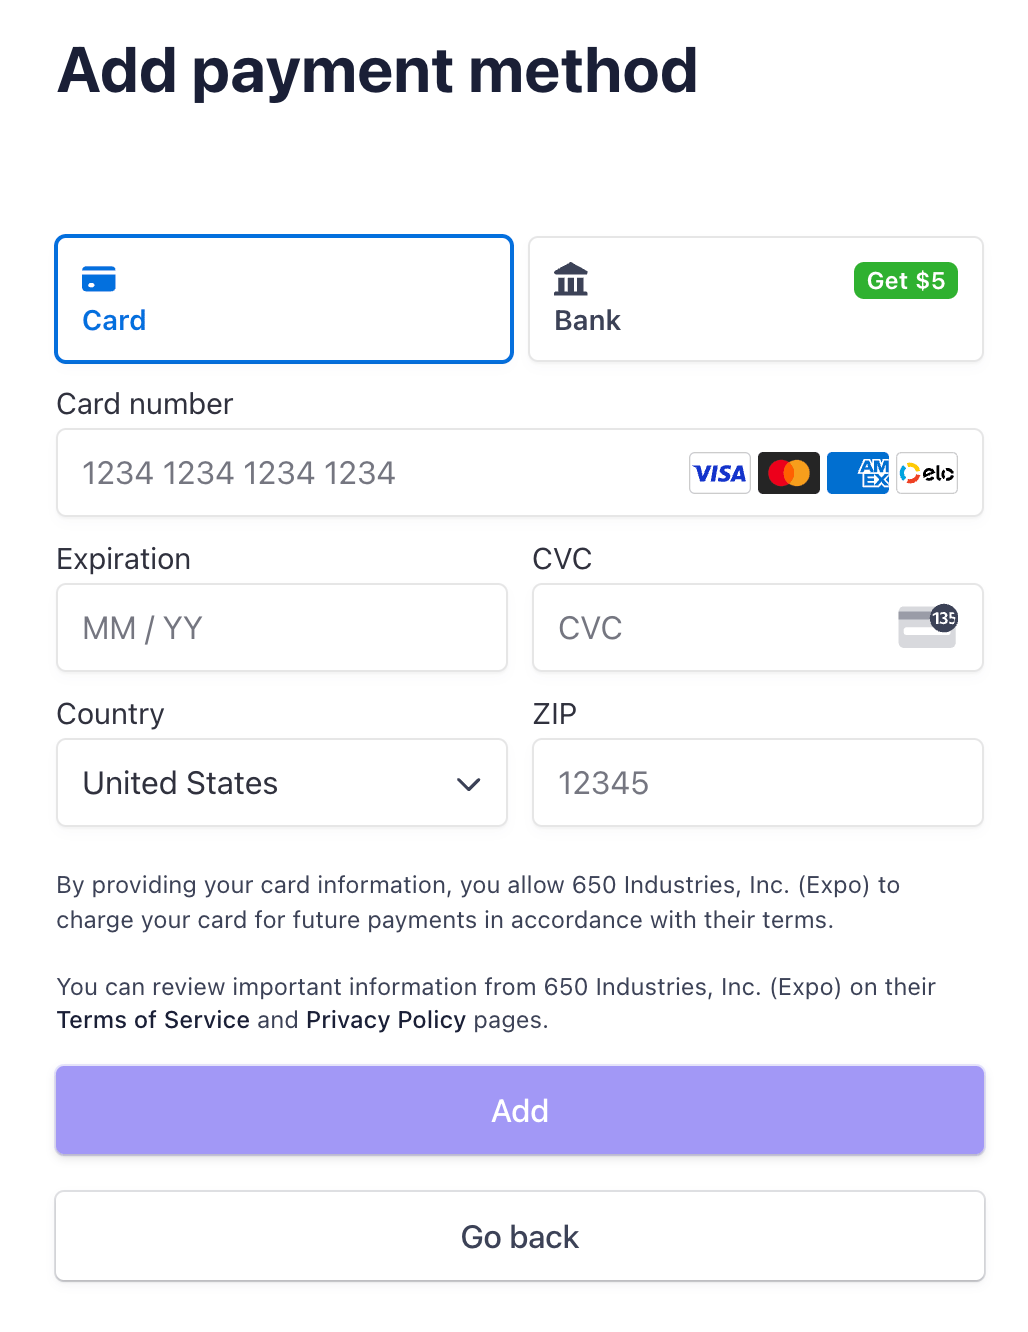 On add a new payment method, enter the new payment method details.